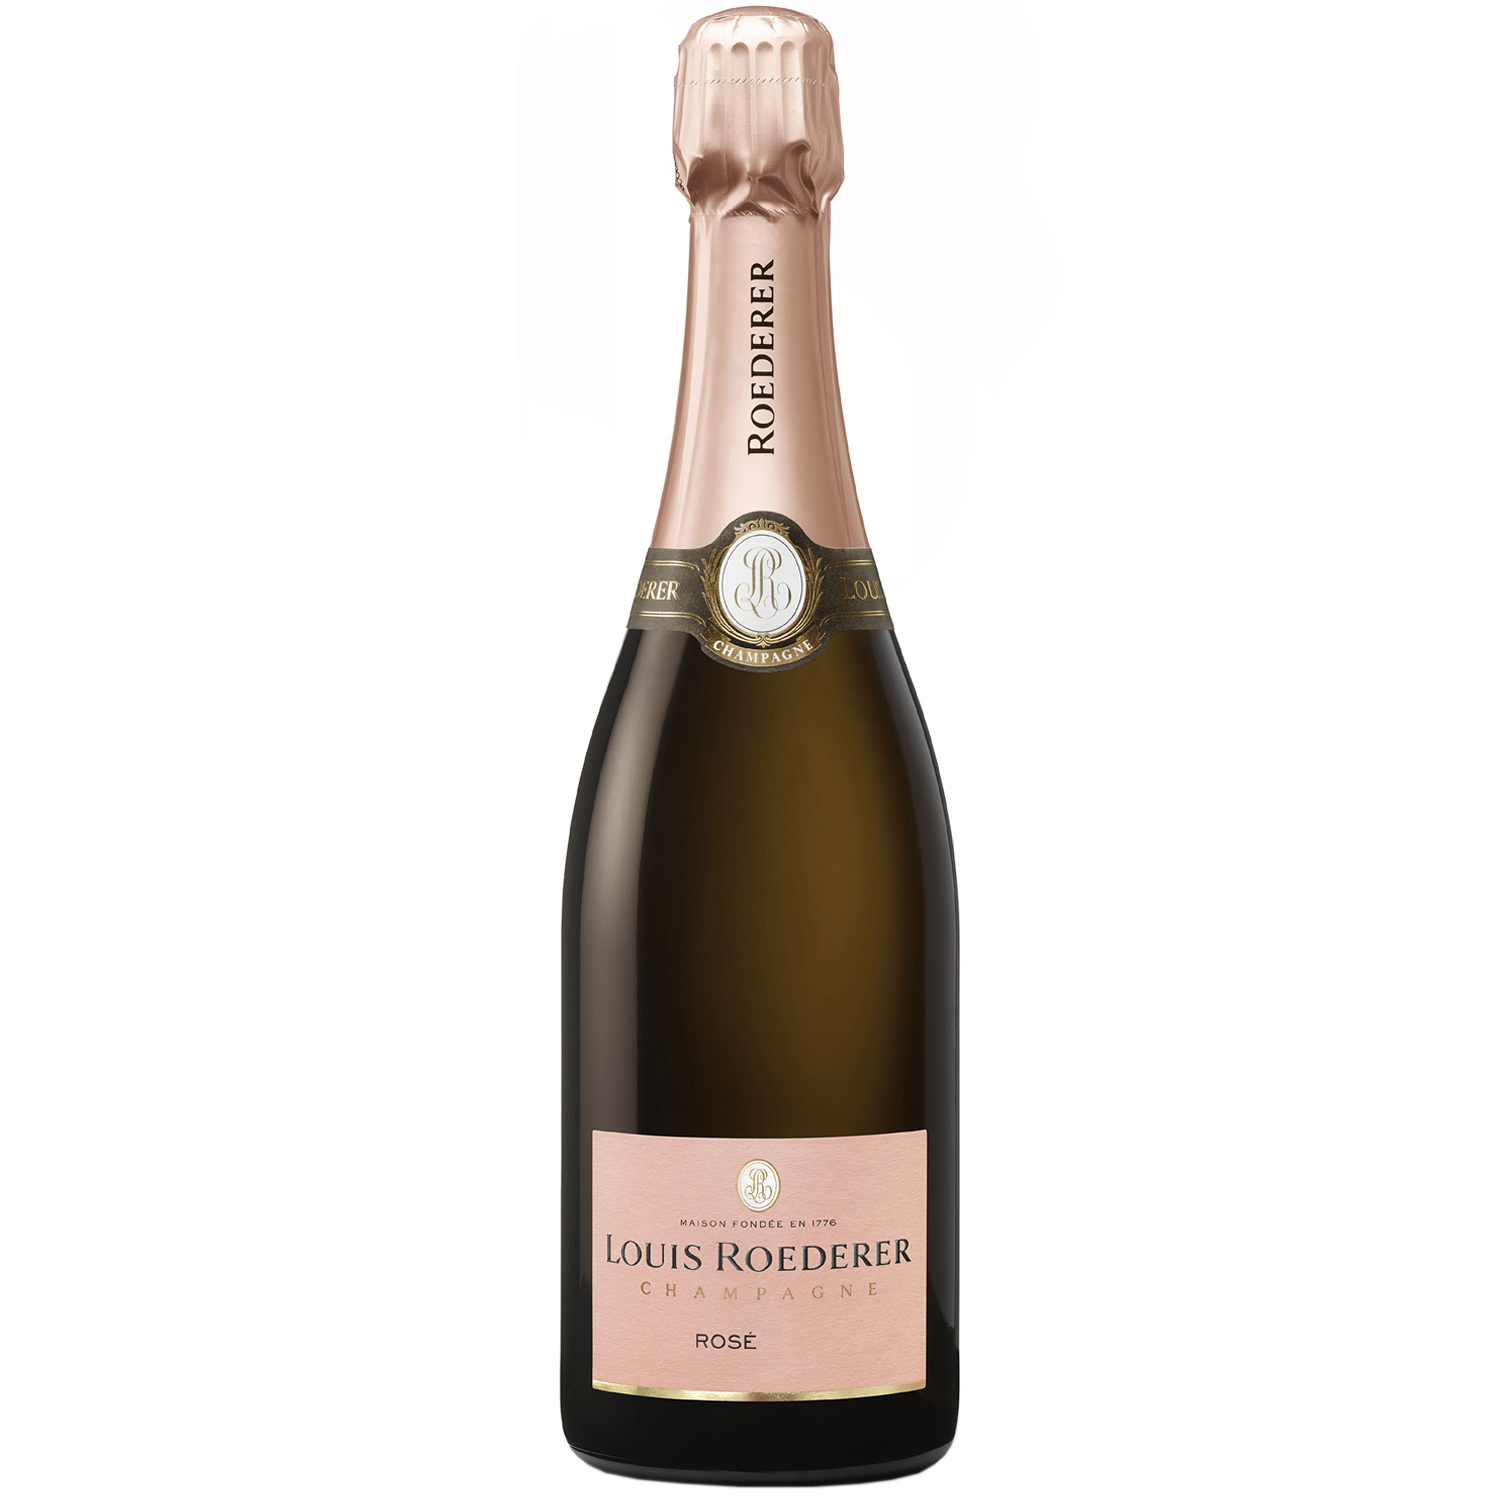 Louis Roederer Champagne Rose 2016